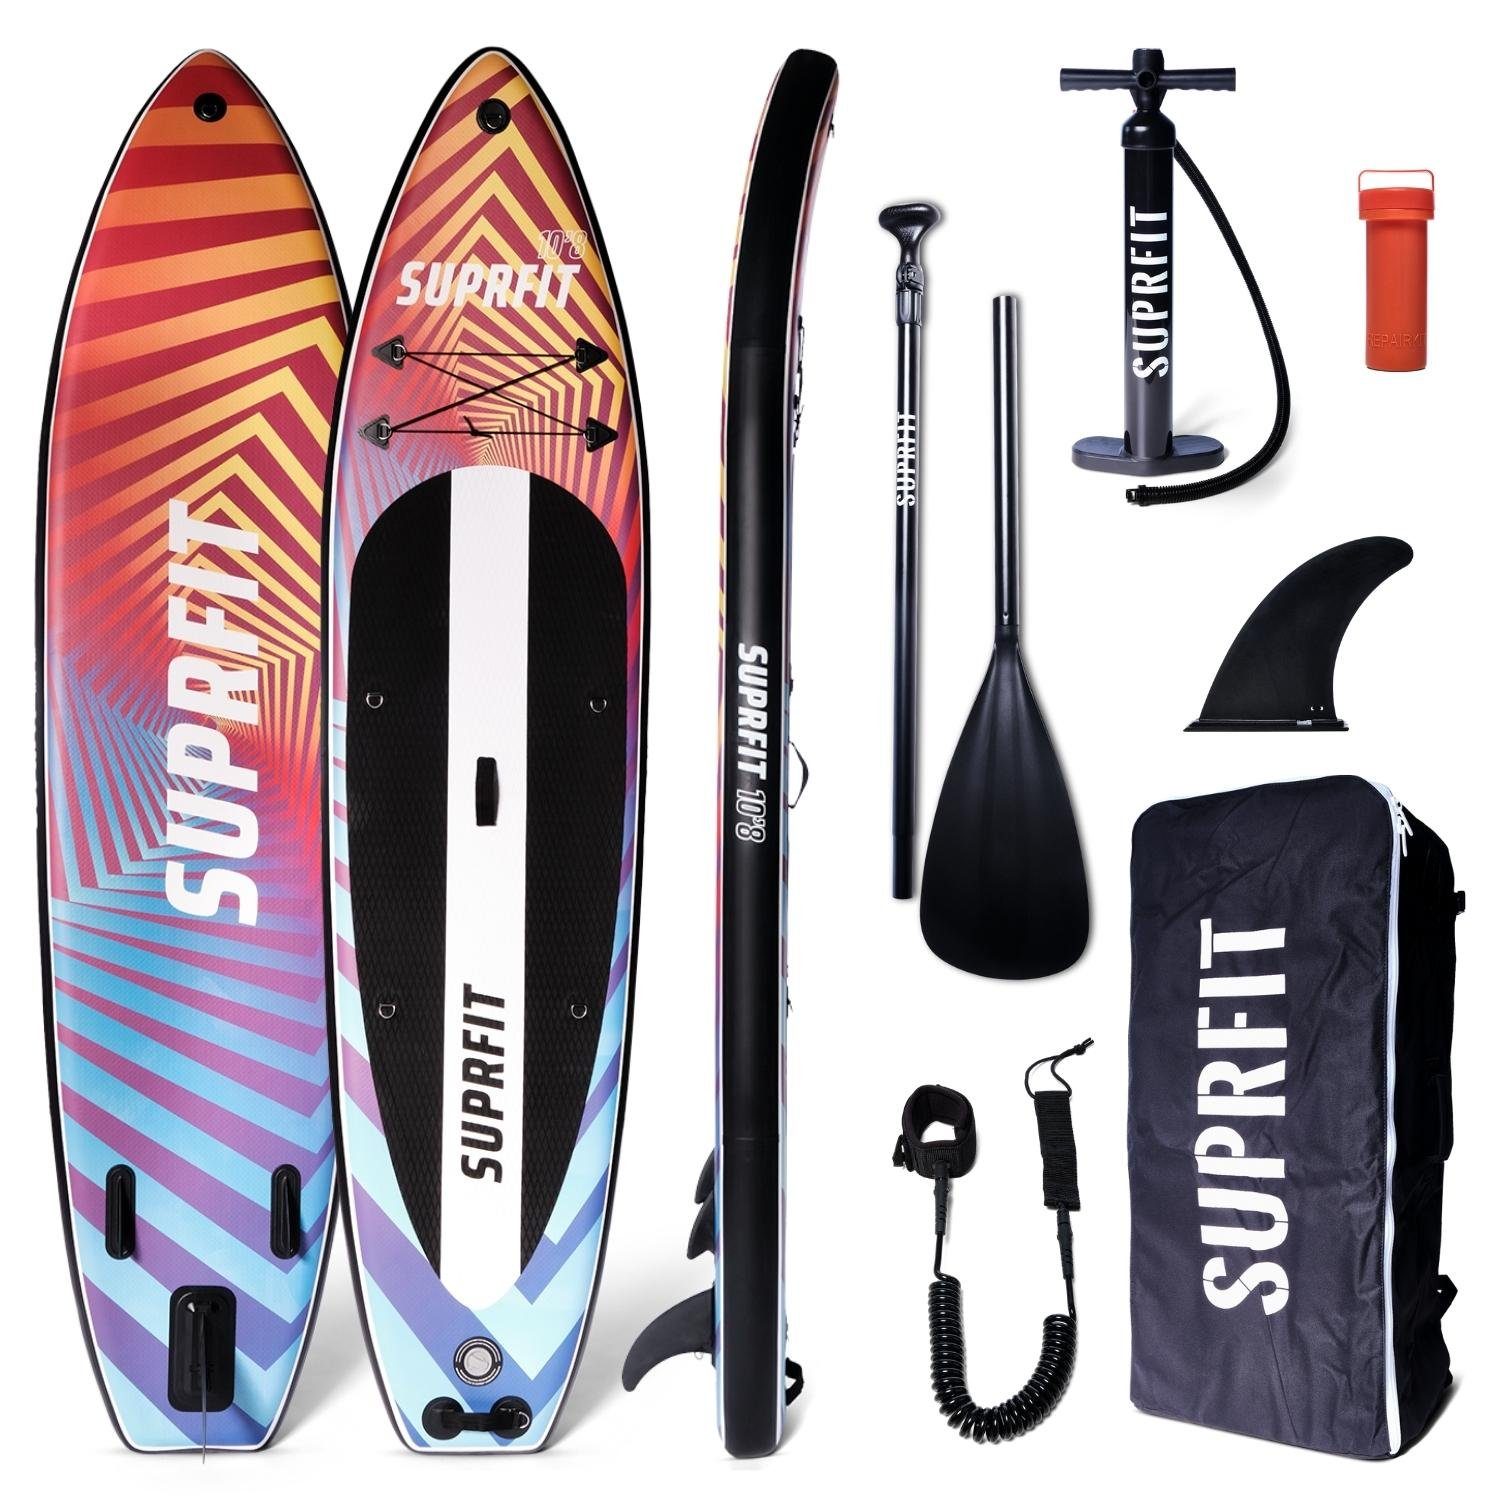 SF SUPRFIT SUP-Board ab Optimal Paddle kg, 330 140 15 als max 60 Up aufblasbares mit Stand-Up-Paddling Board Komplett-Set, 78 - Optical, doppelter Schichtung, kg x cm Board Stand x PVC